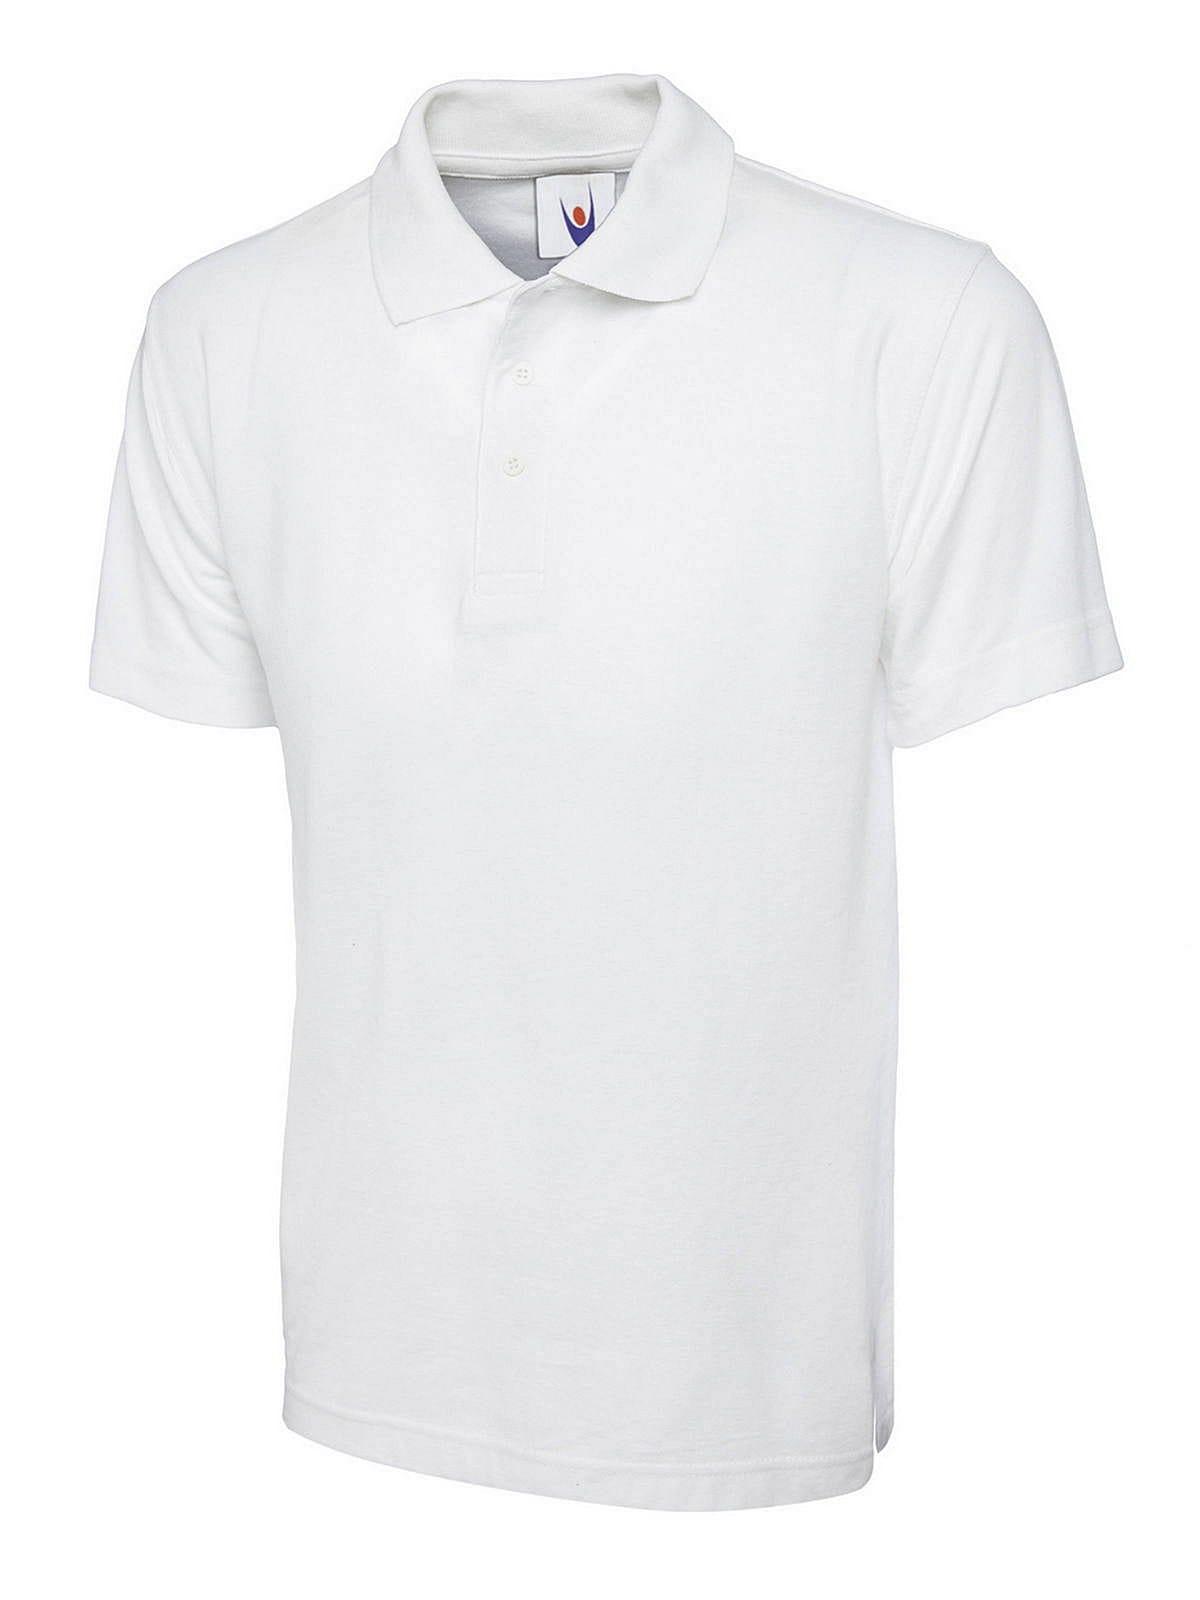 Uneek 220GSM Classic Polo Shirt in White (Product Code: UC101)